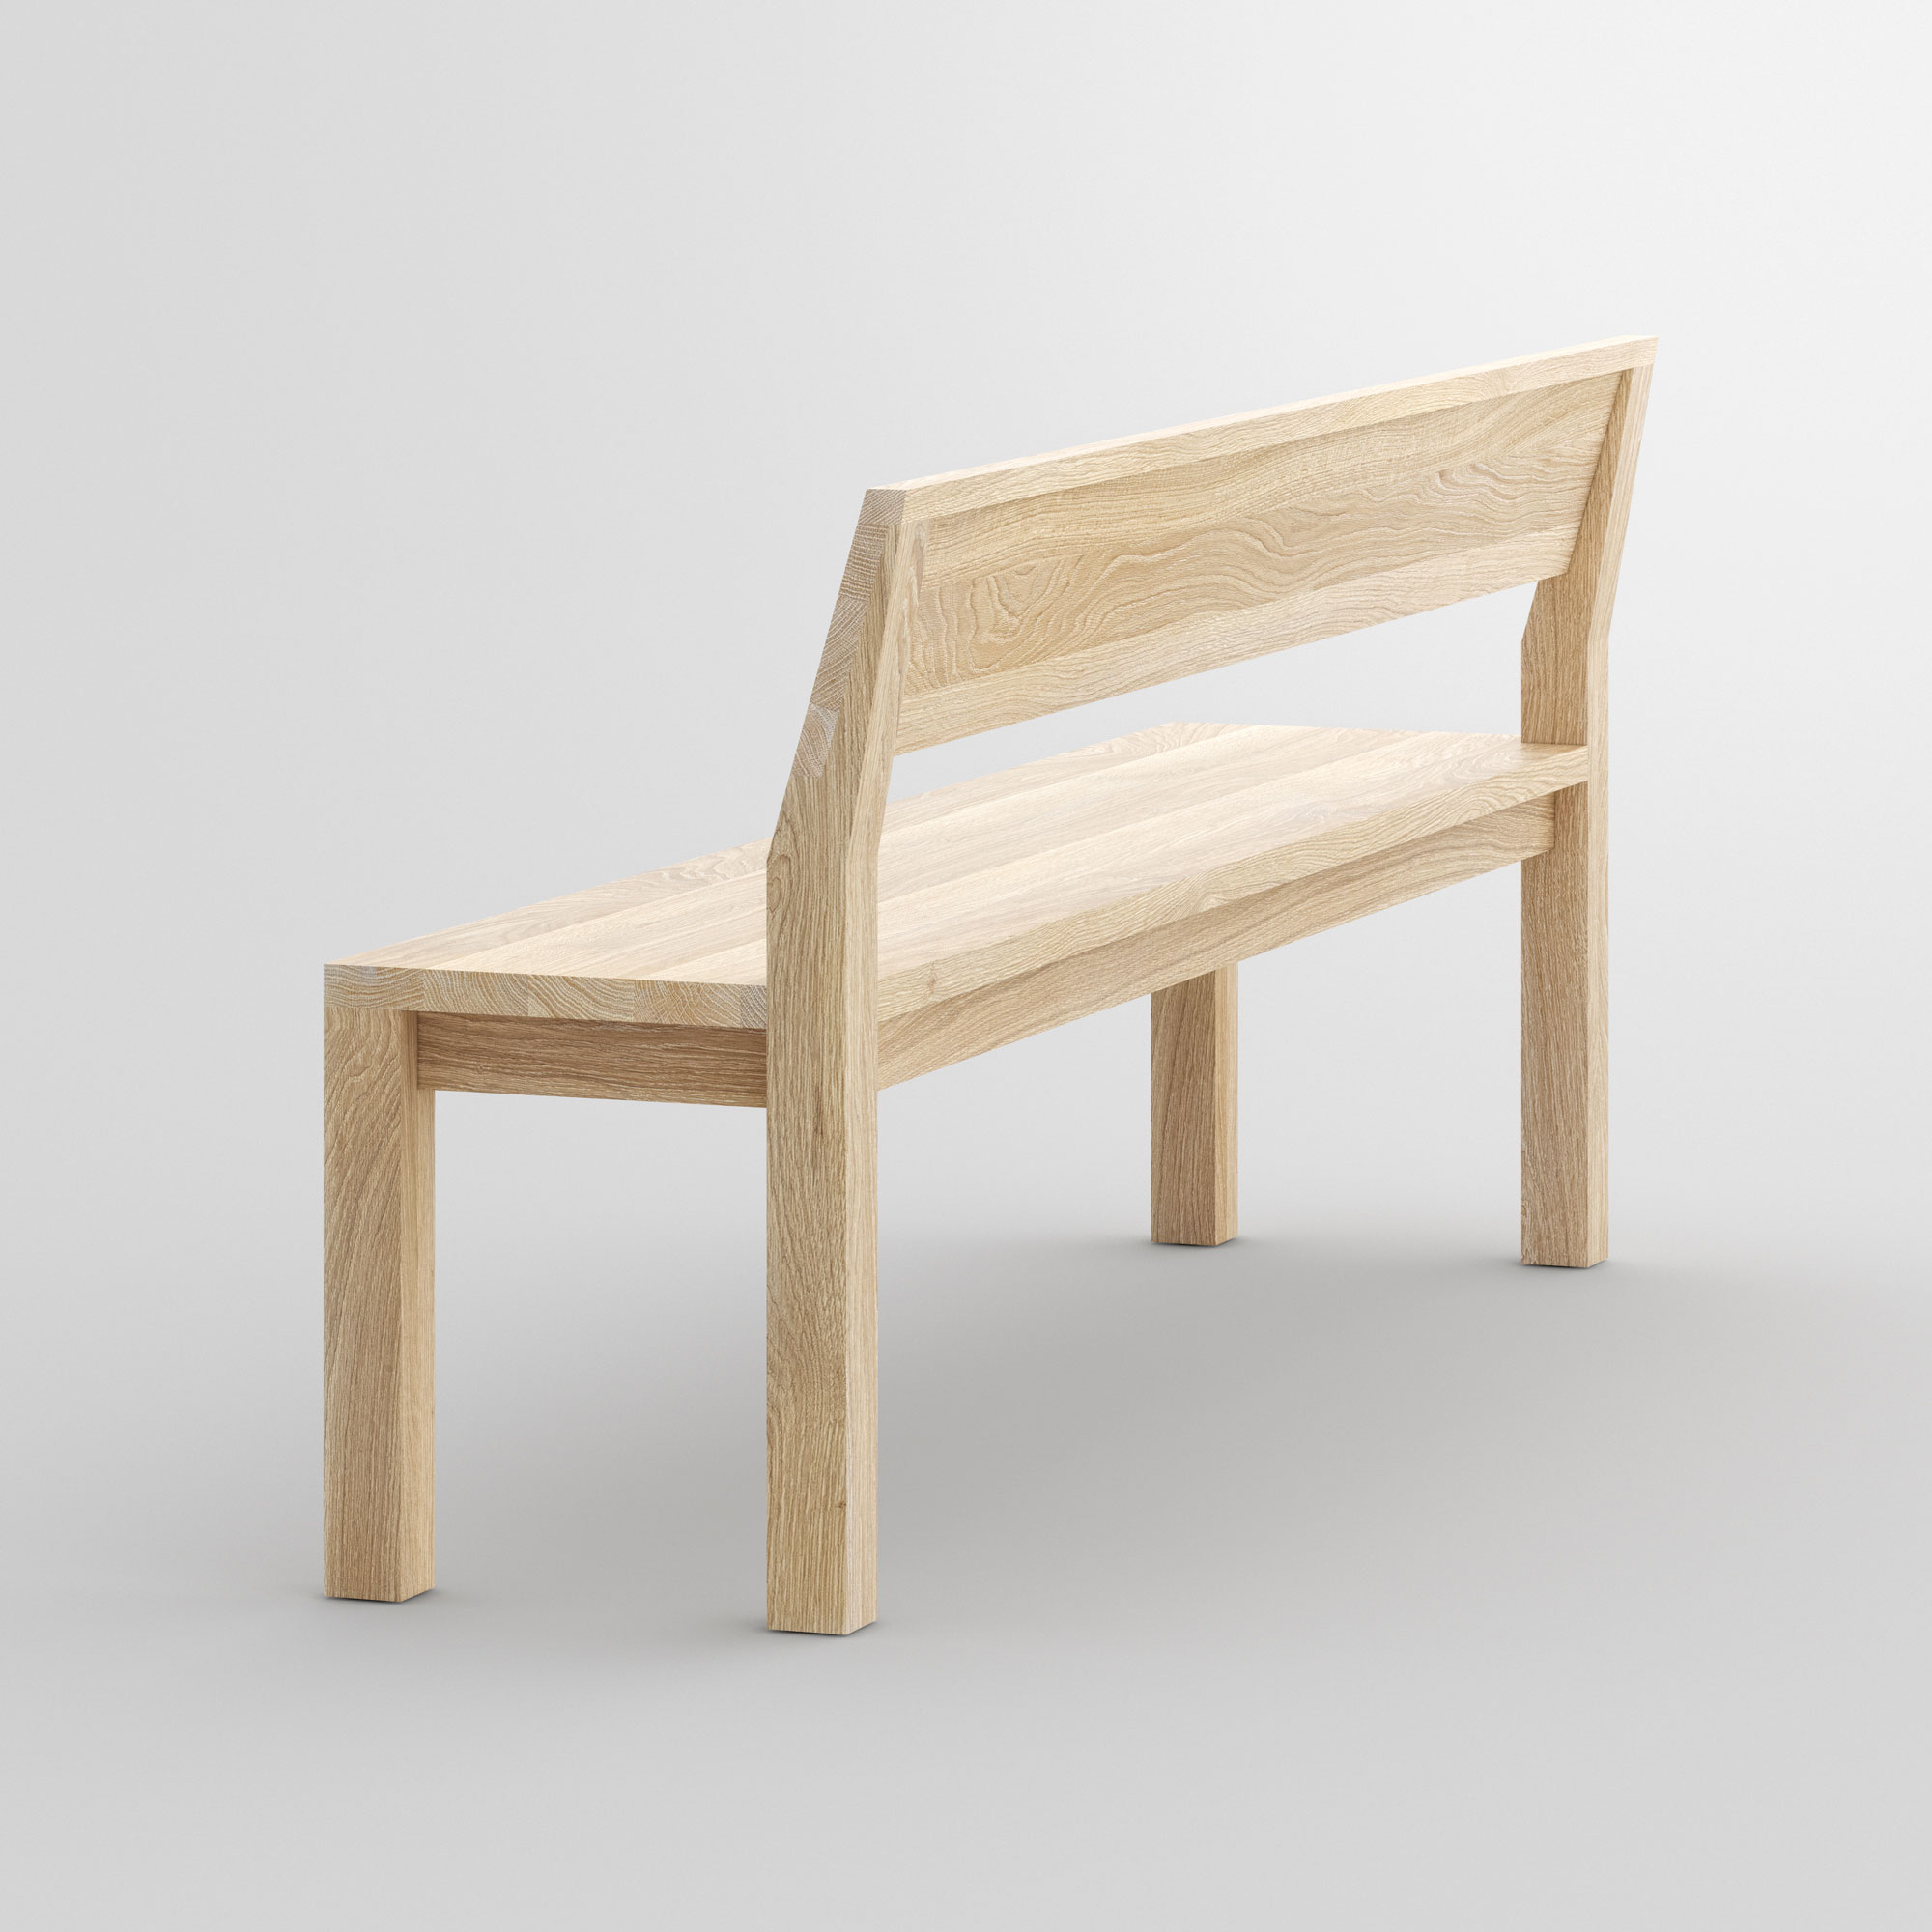 Bench with Backrest CUBUS RL cam1 custom made in solid wood by vitamin design